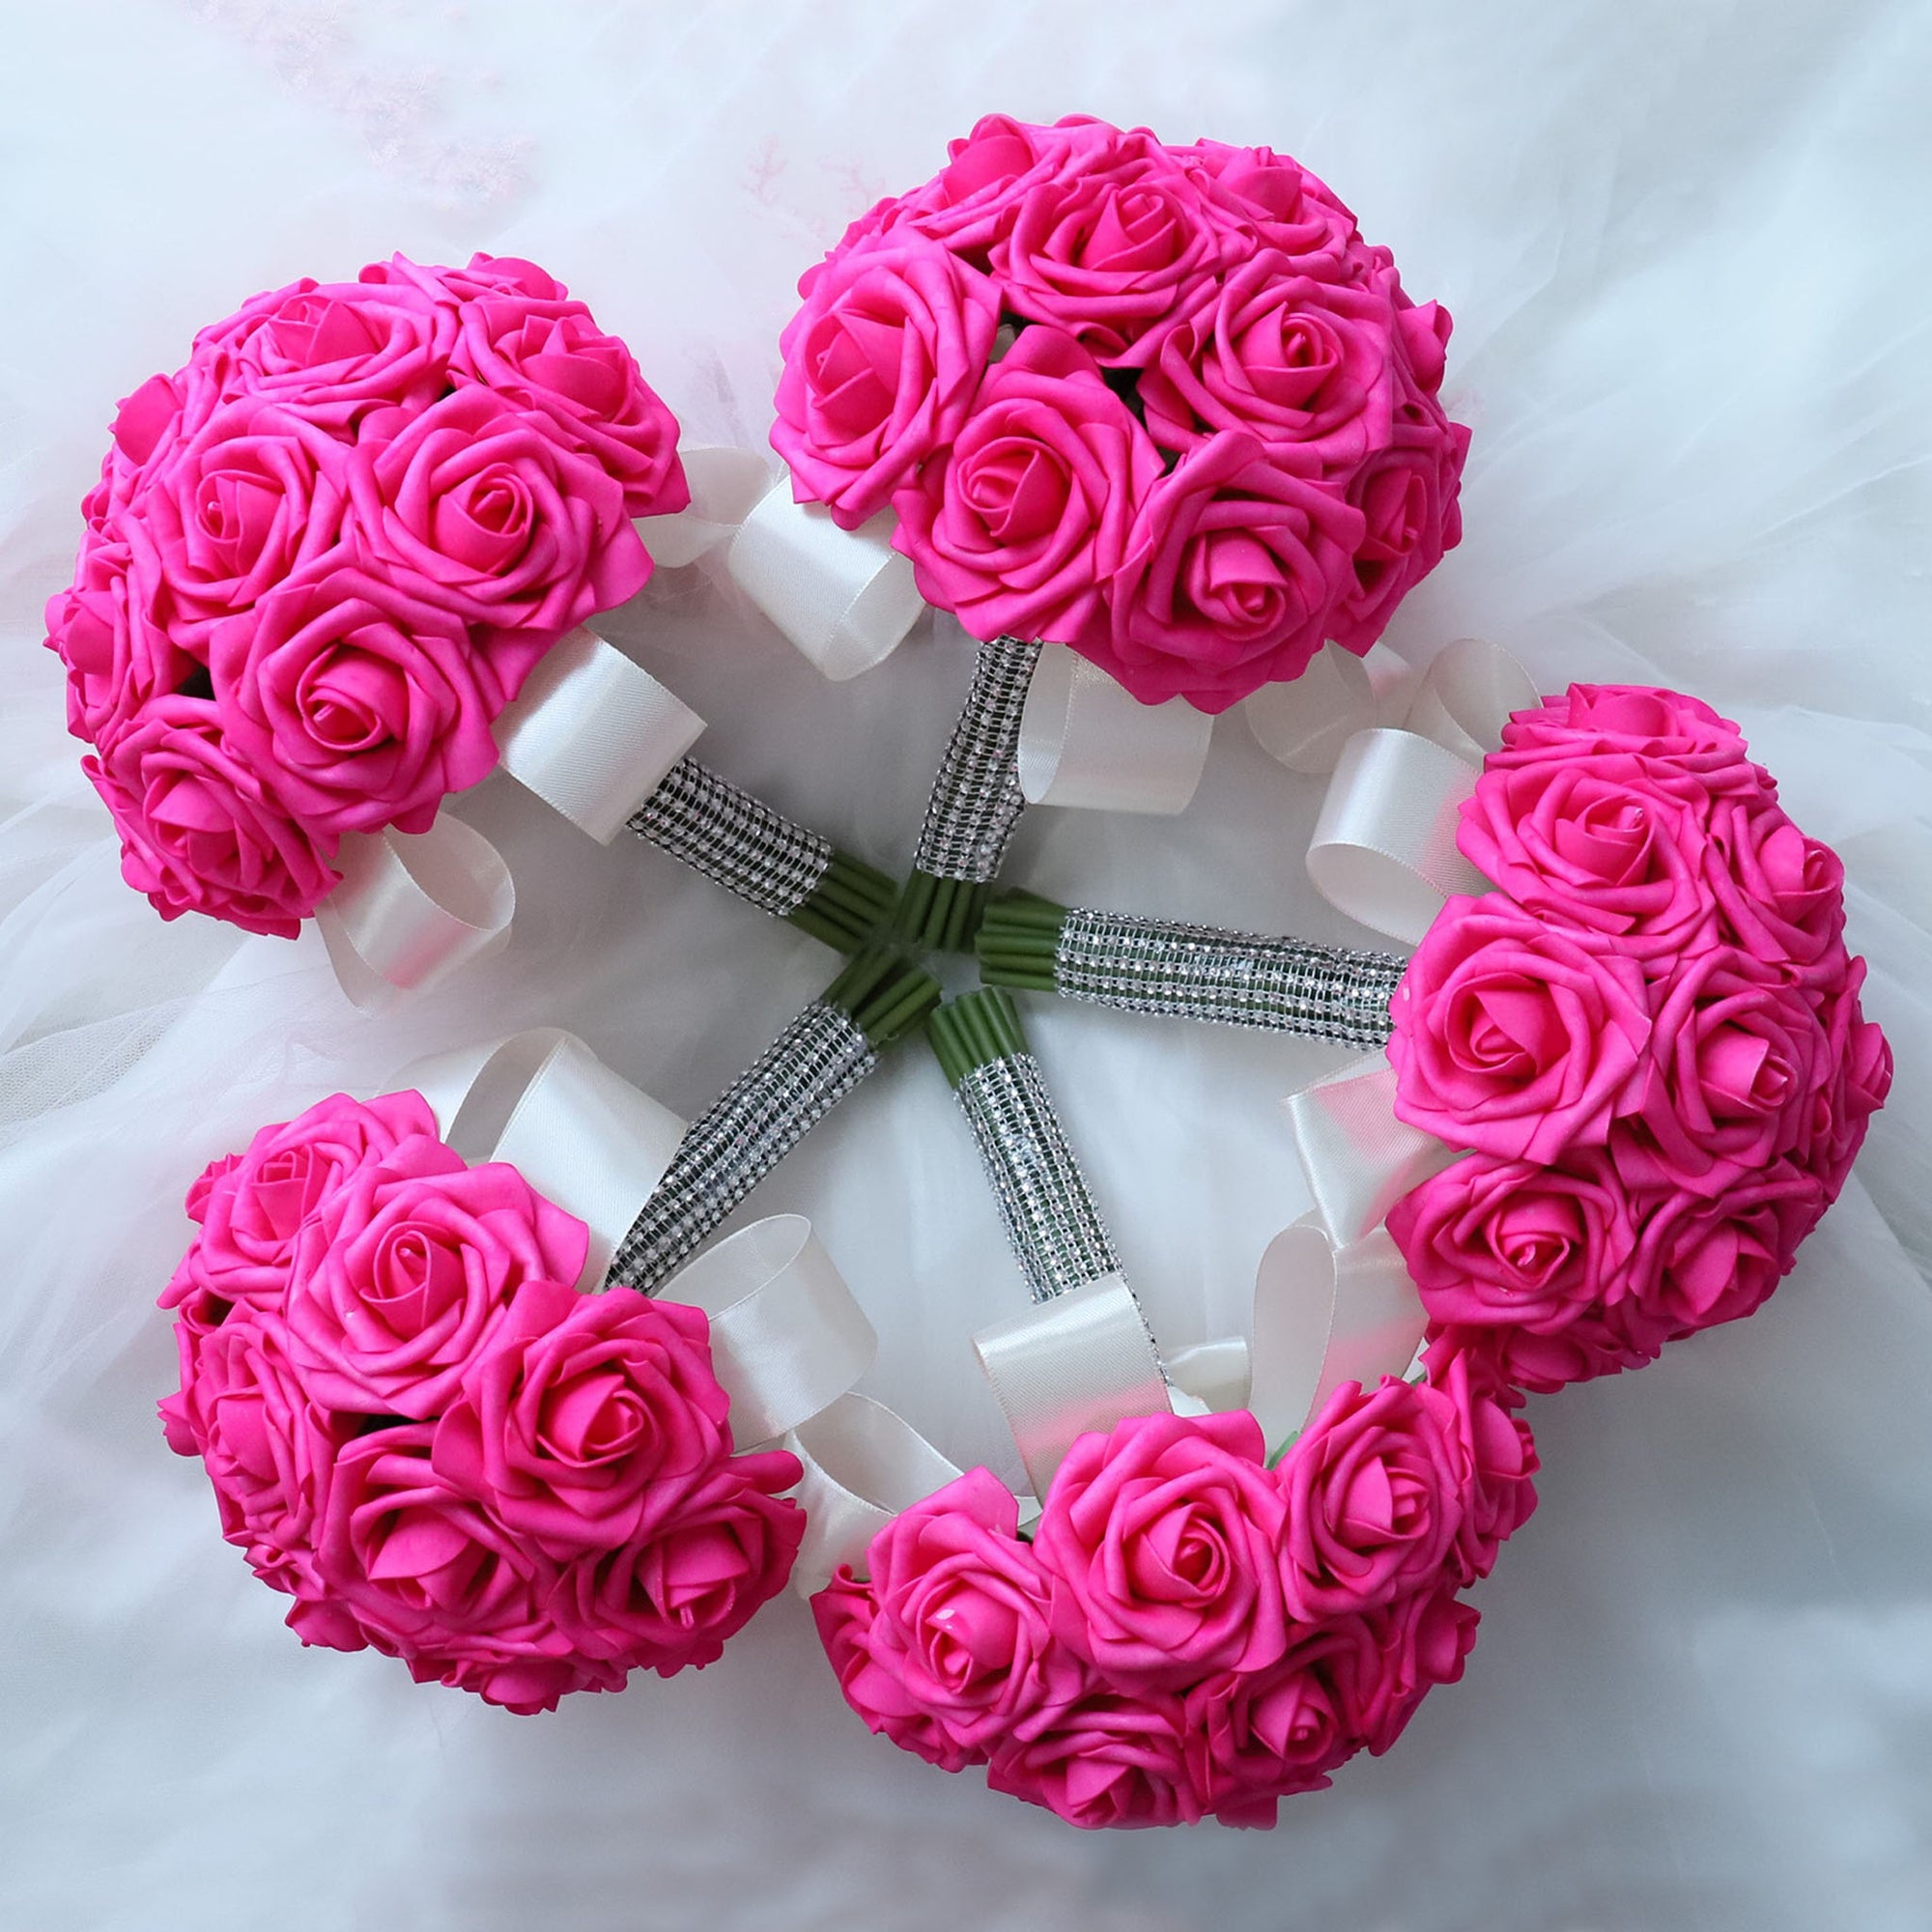 Hot Pink Wedding Bouquets Boutonnieres Corsages